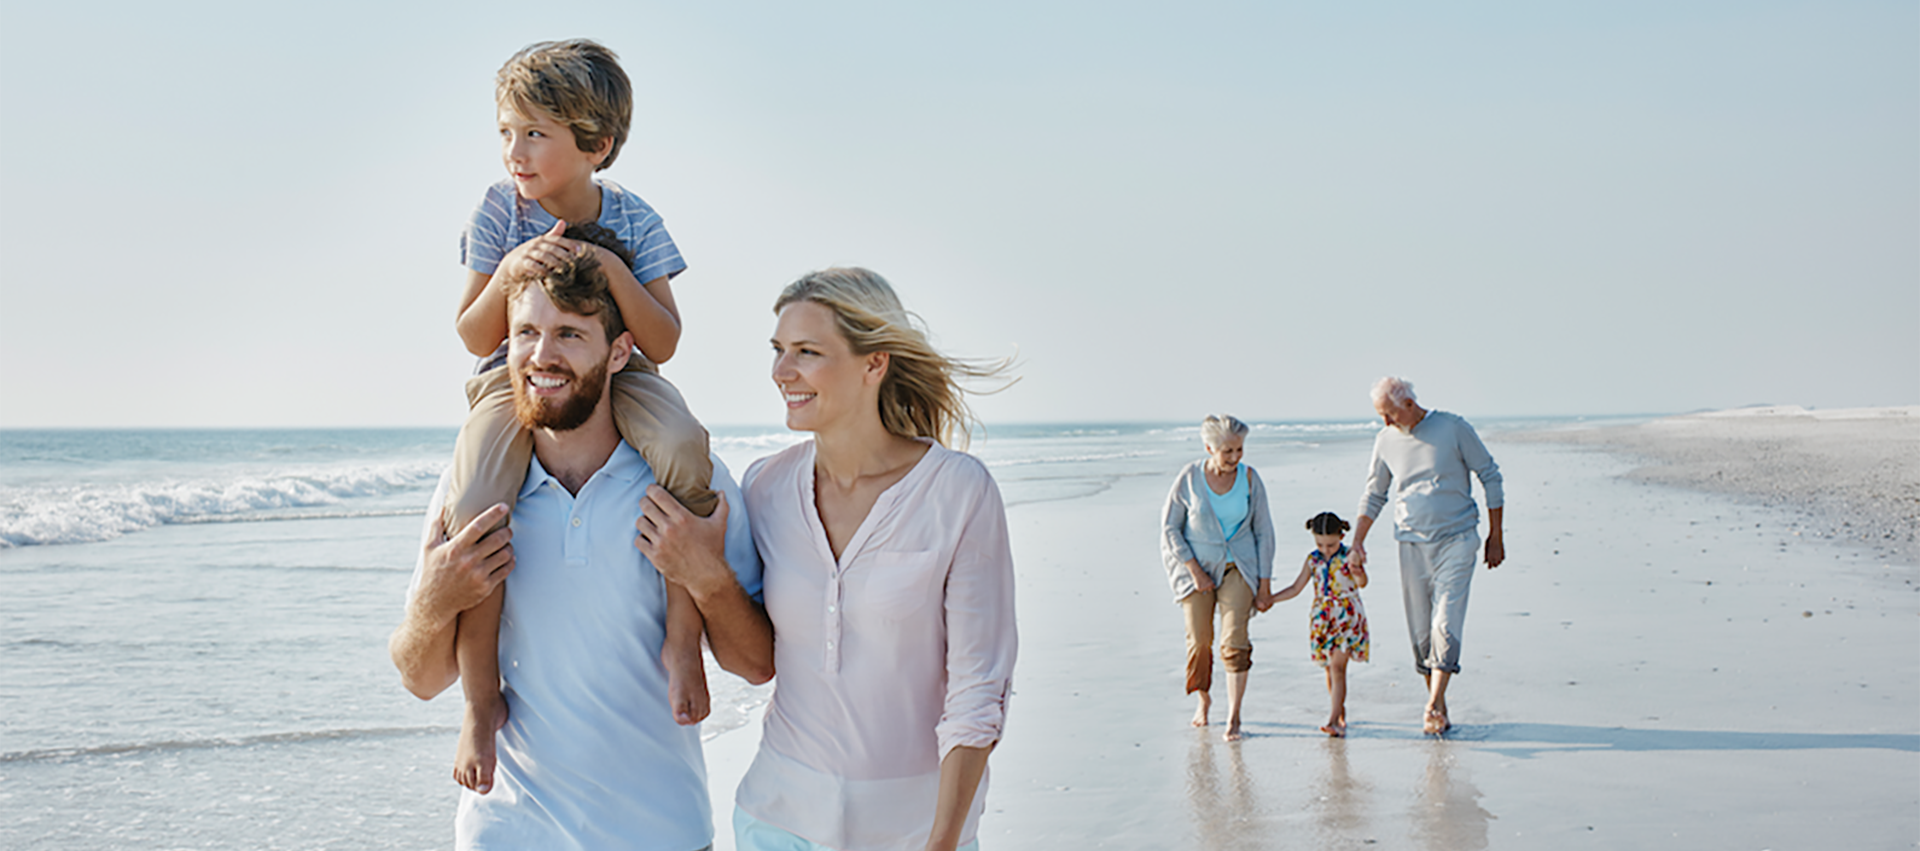 Image of a family walking along the beach